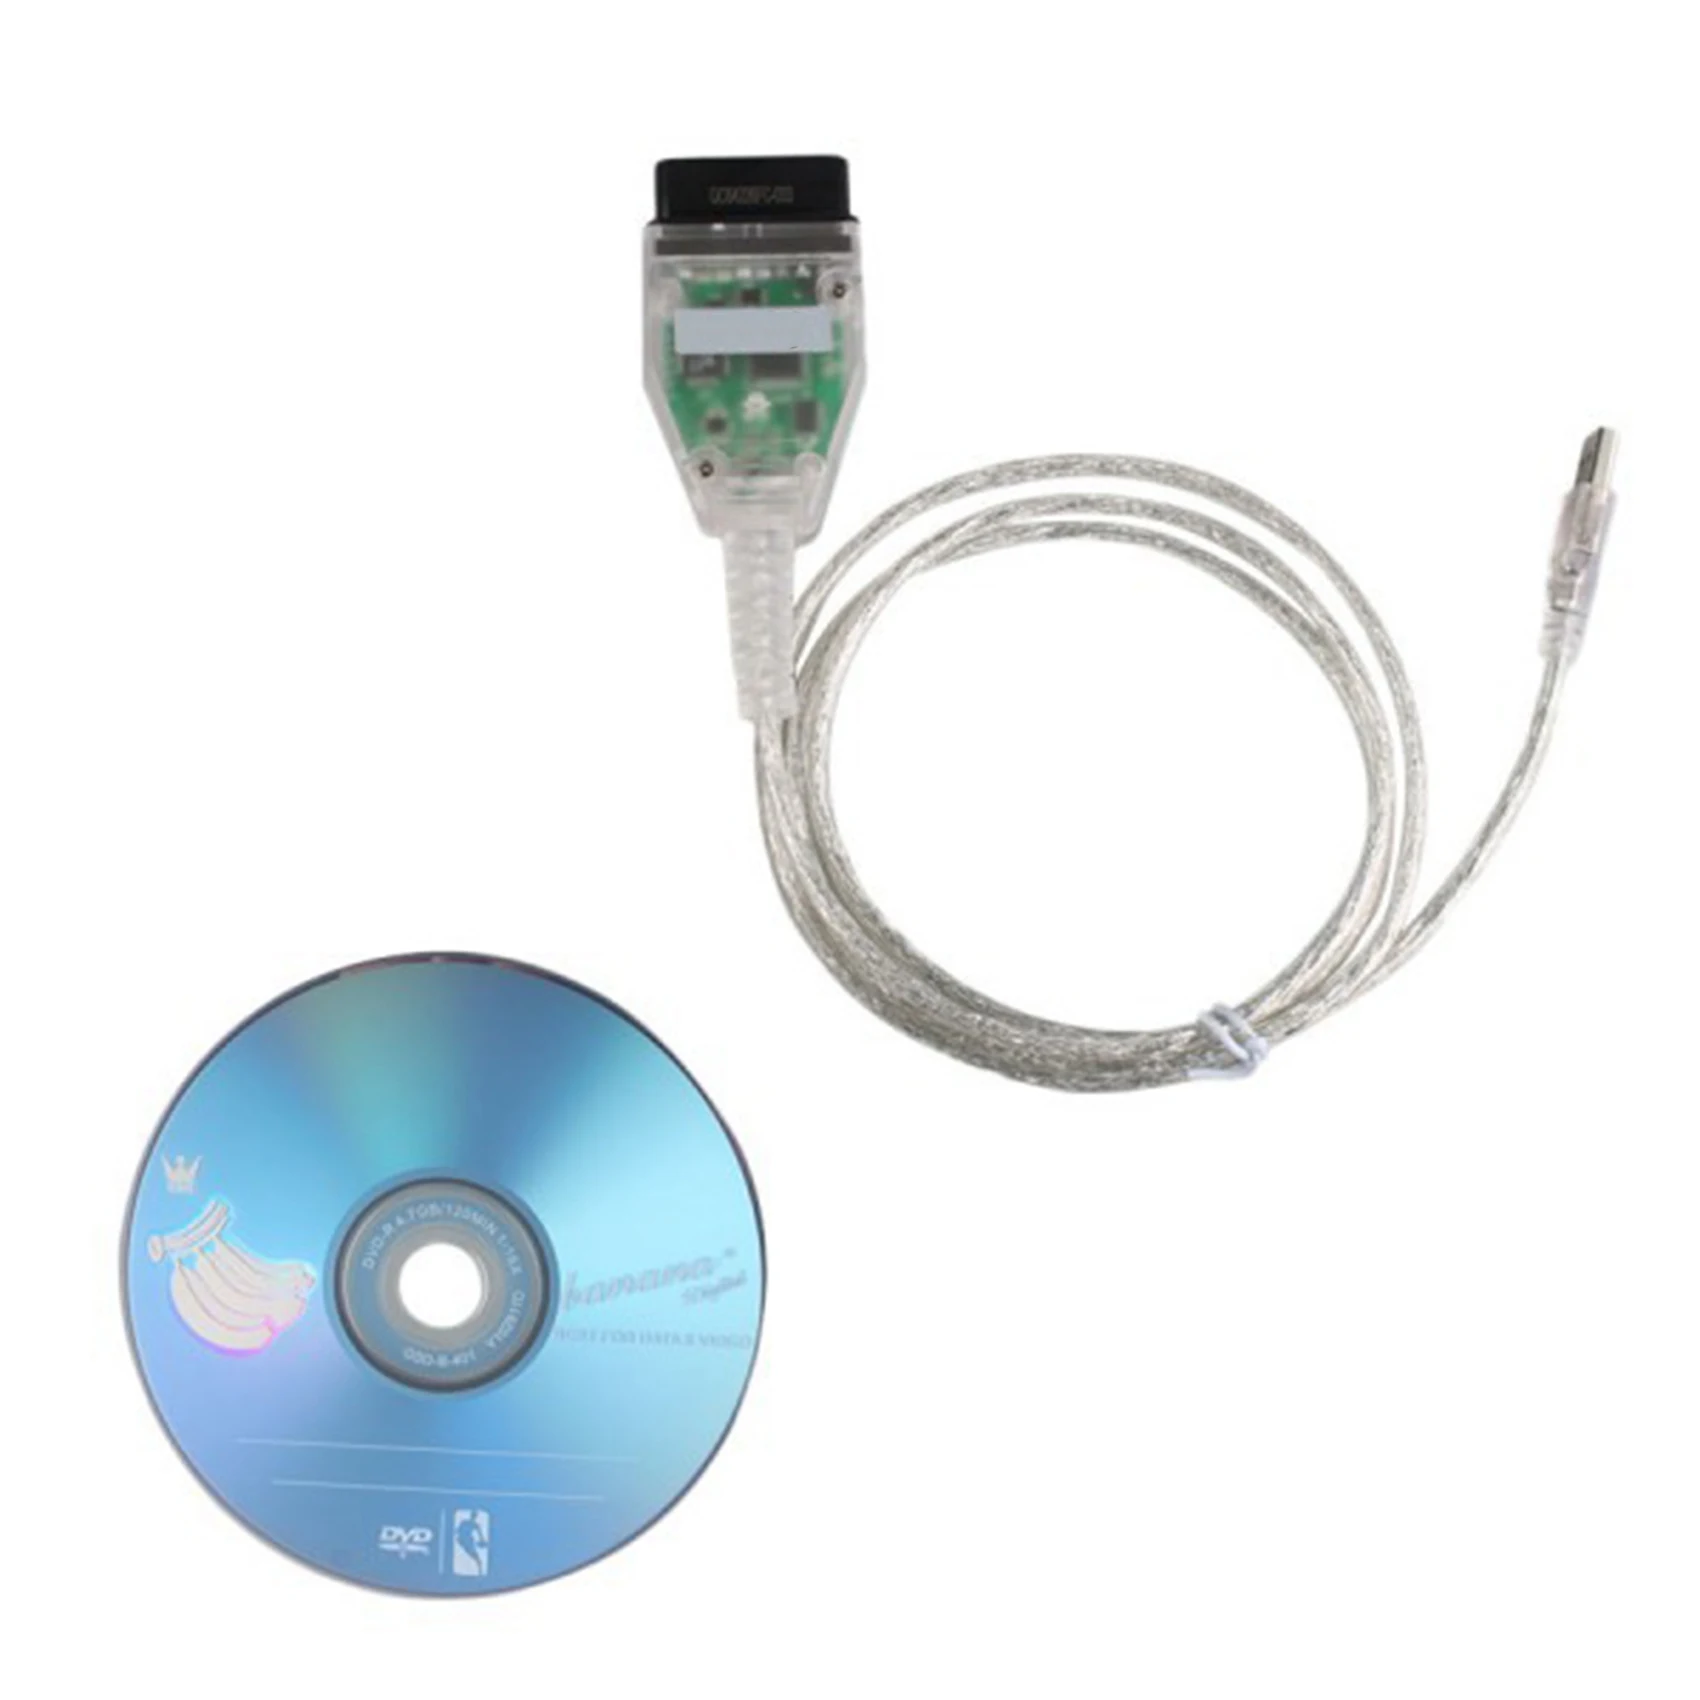 

Car Diagnostic Machine Scanner Cable INPA K+CAN K+DCAN BYOBDII OBD Scanning Cable for-BMW E60 E61 E83 E81 E87 and Others